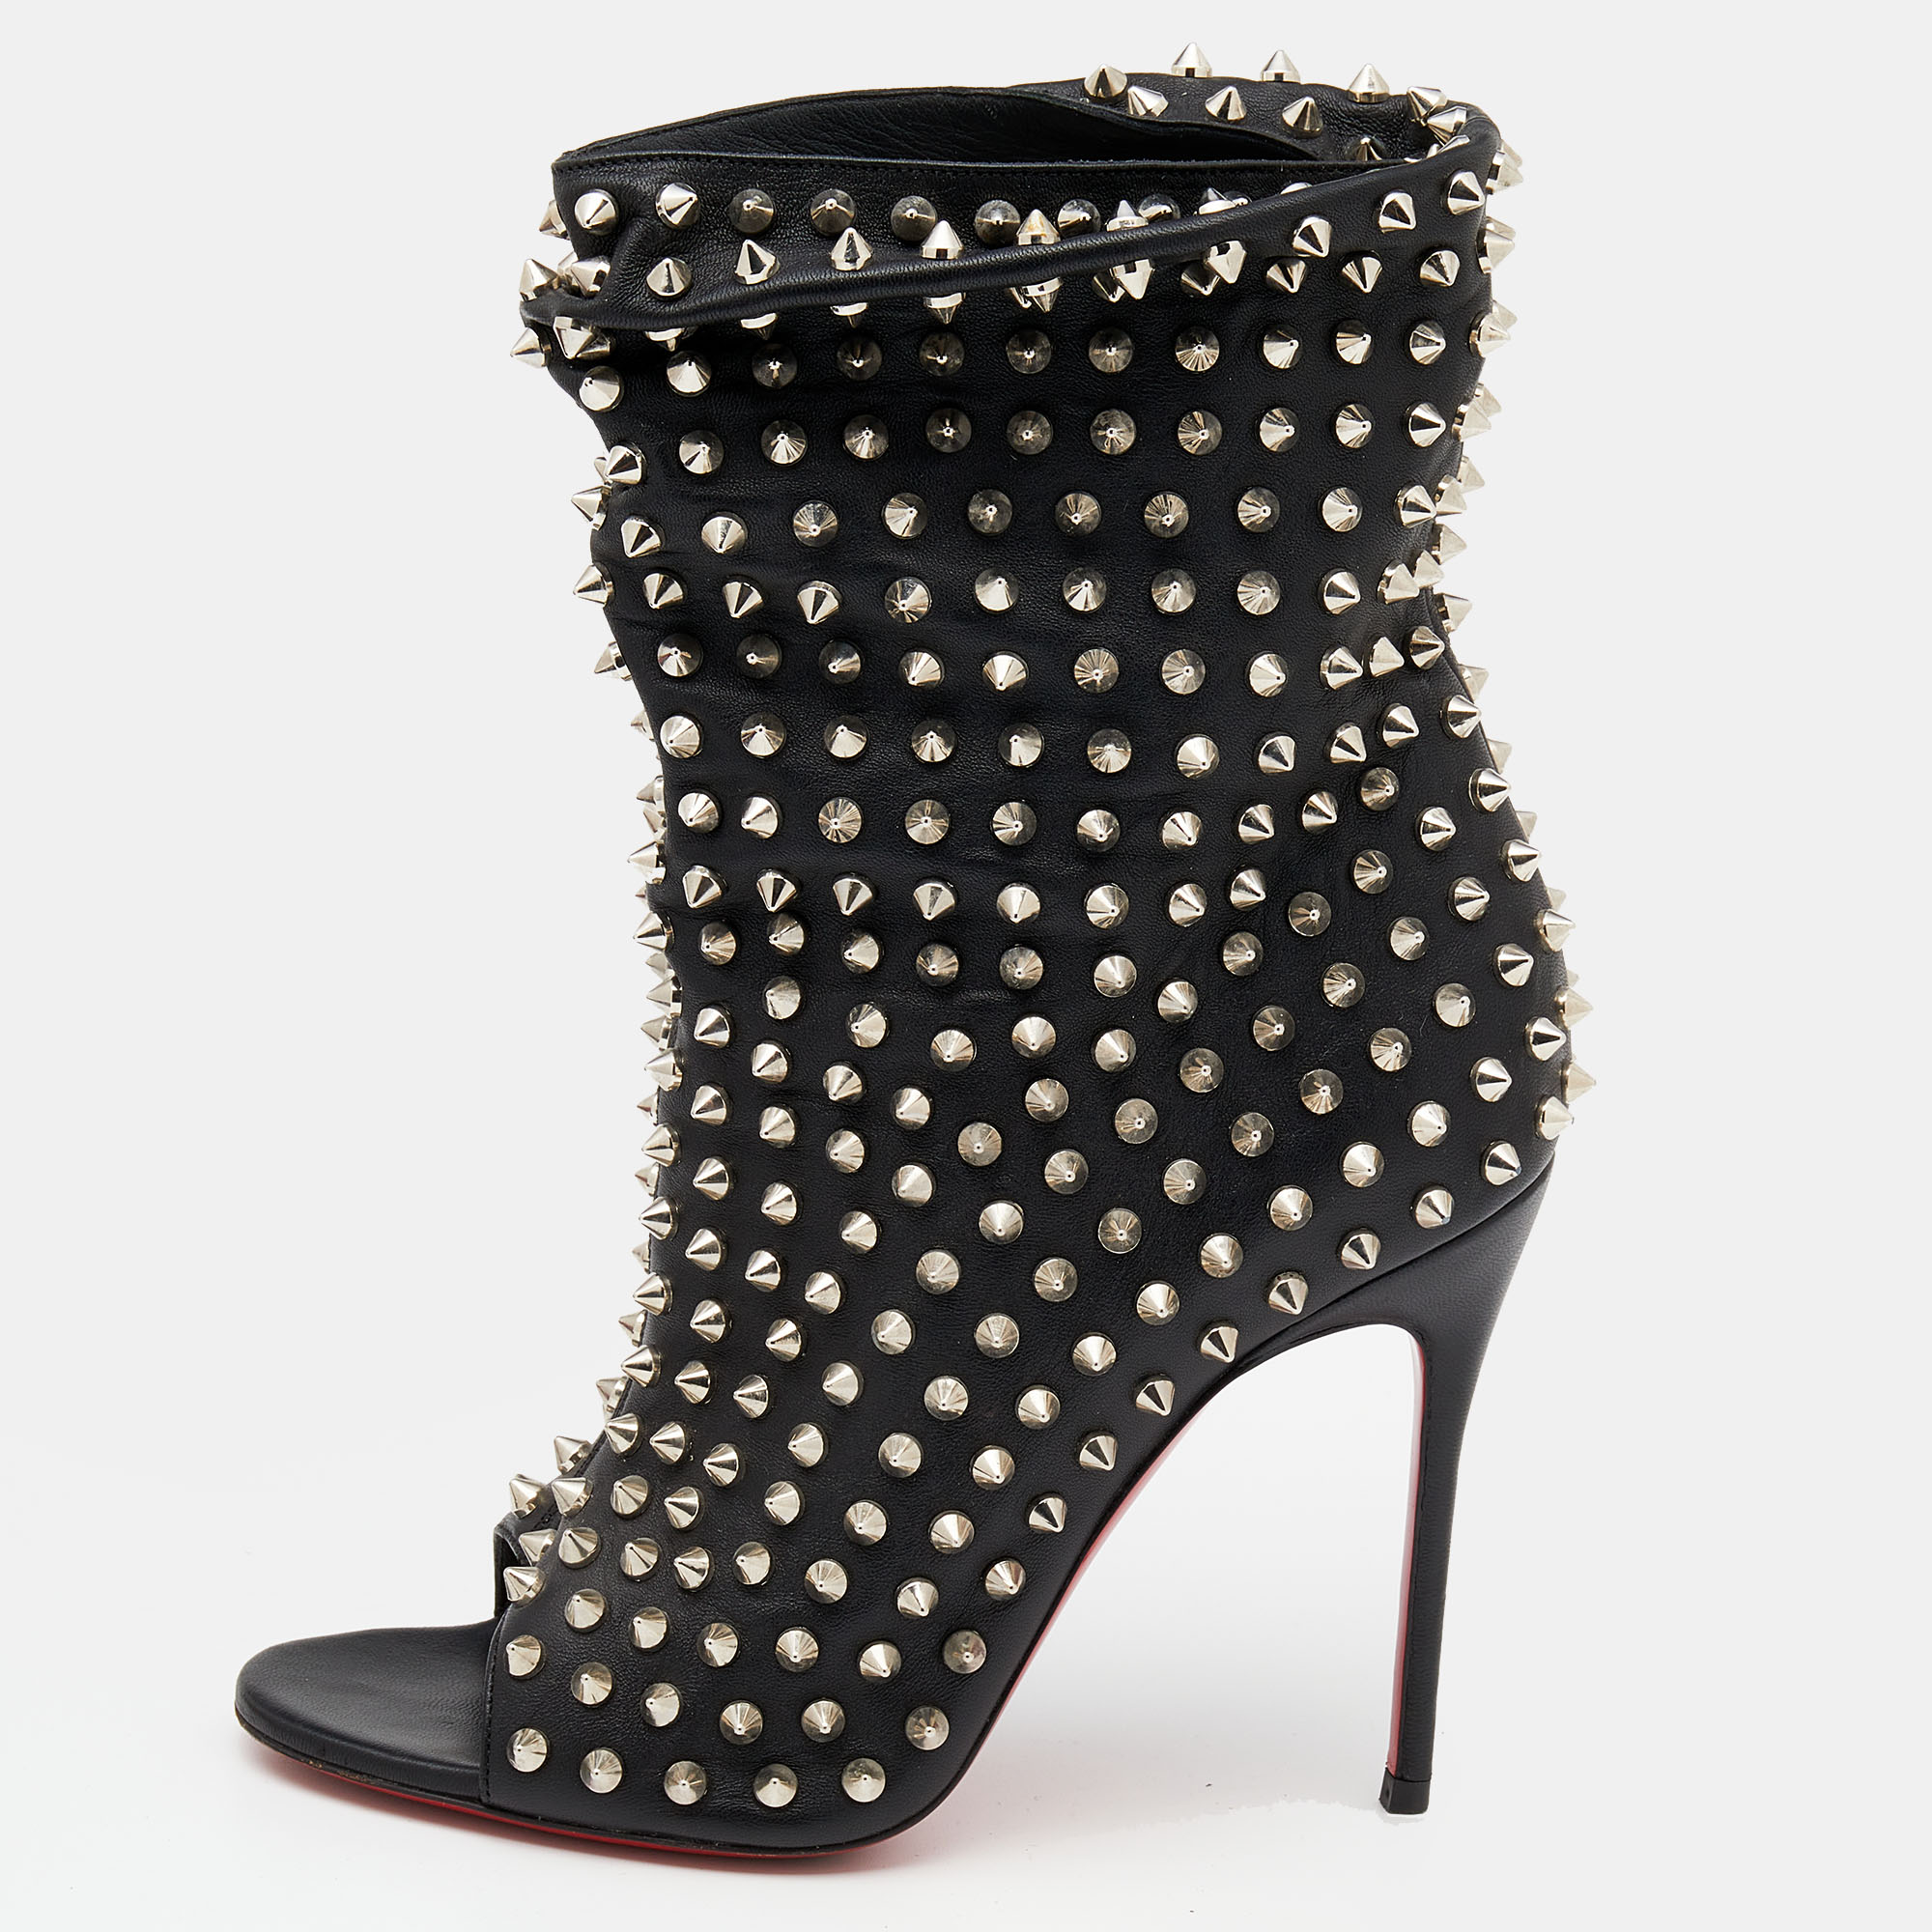 Christian Louboutin Black Leather Spiked Guerilla Peep Toe Slouchy Ankle Boots Size 37.5